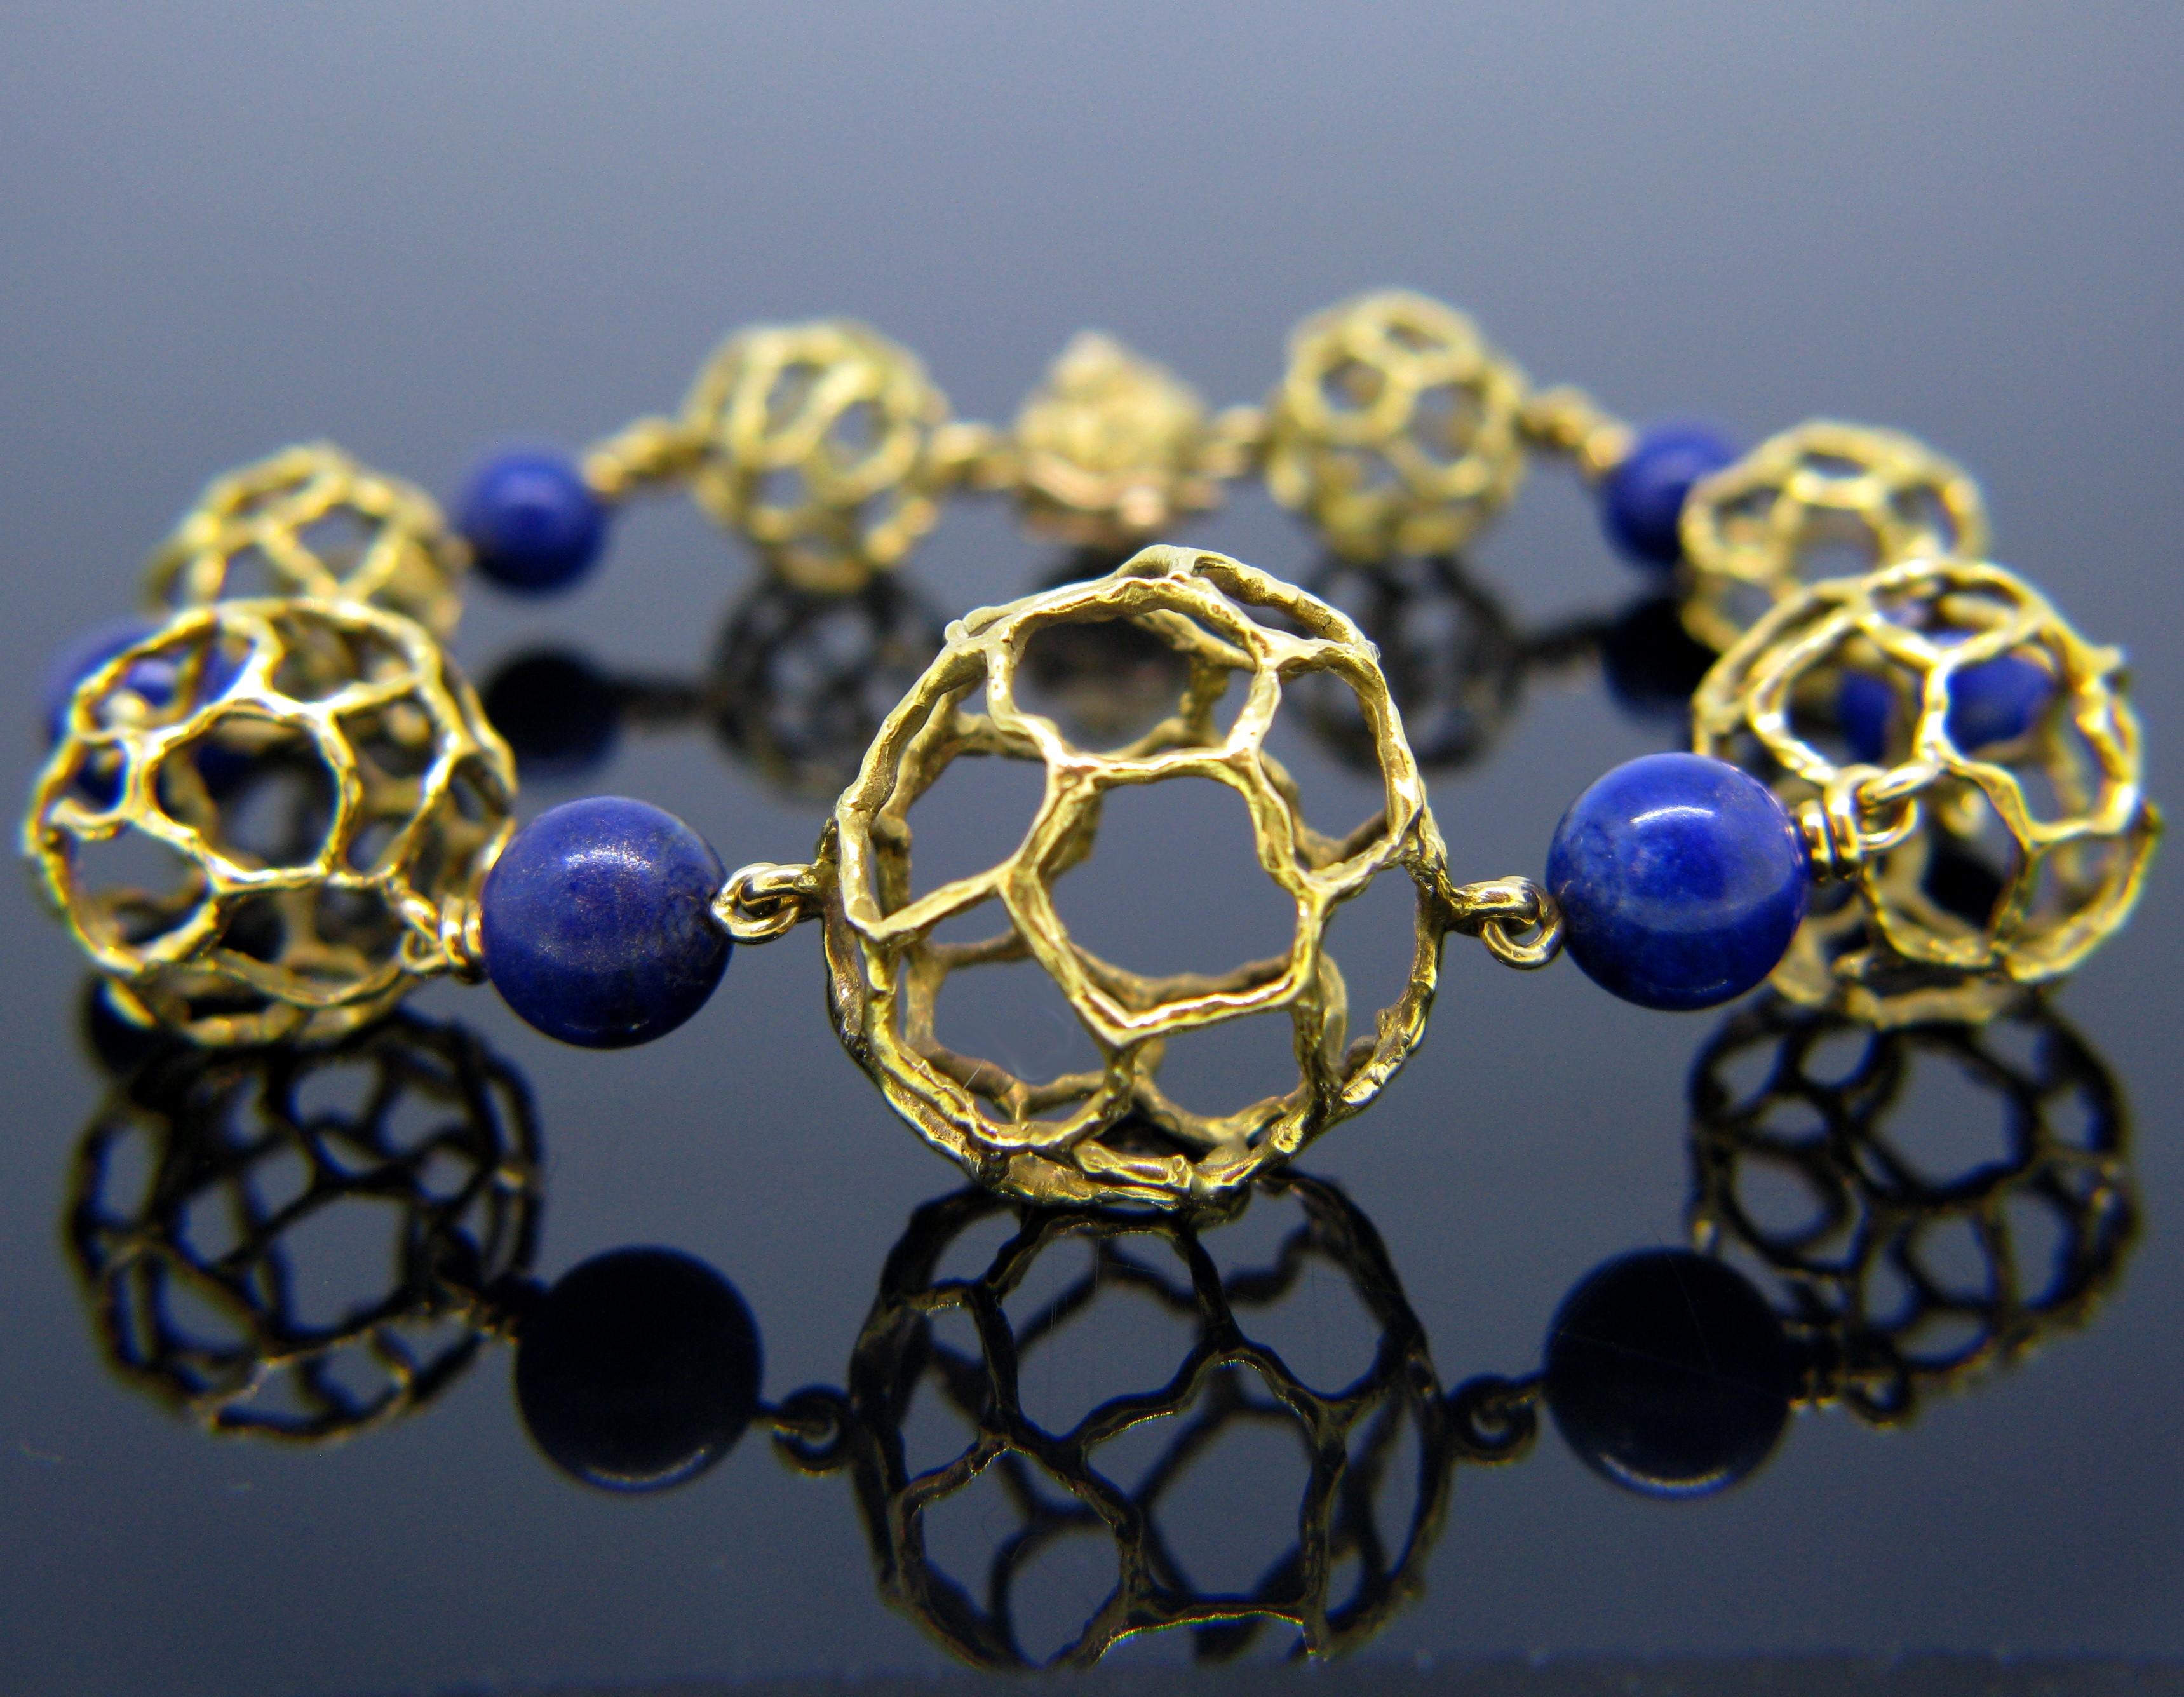 This bracelet is signed Chaumet Paris and is from the 1970s. It consists of six beads of lapis lazuli and seven spheres graduating in size in textured yellow gold. This beautiful bracelet has a very interesting and bold